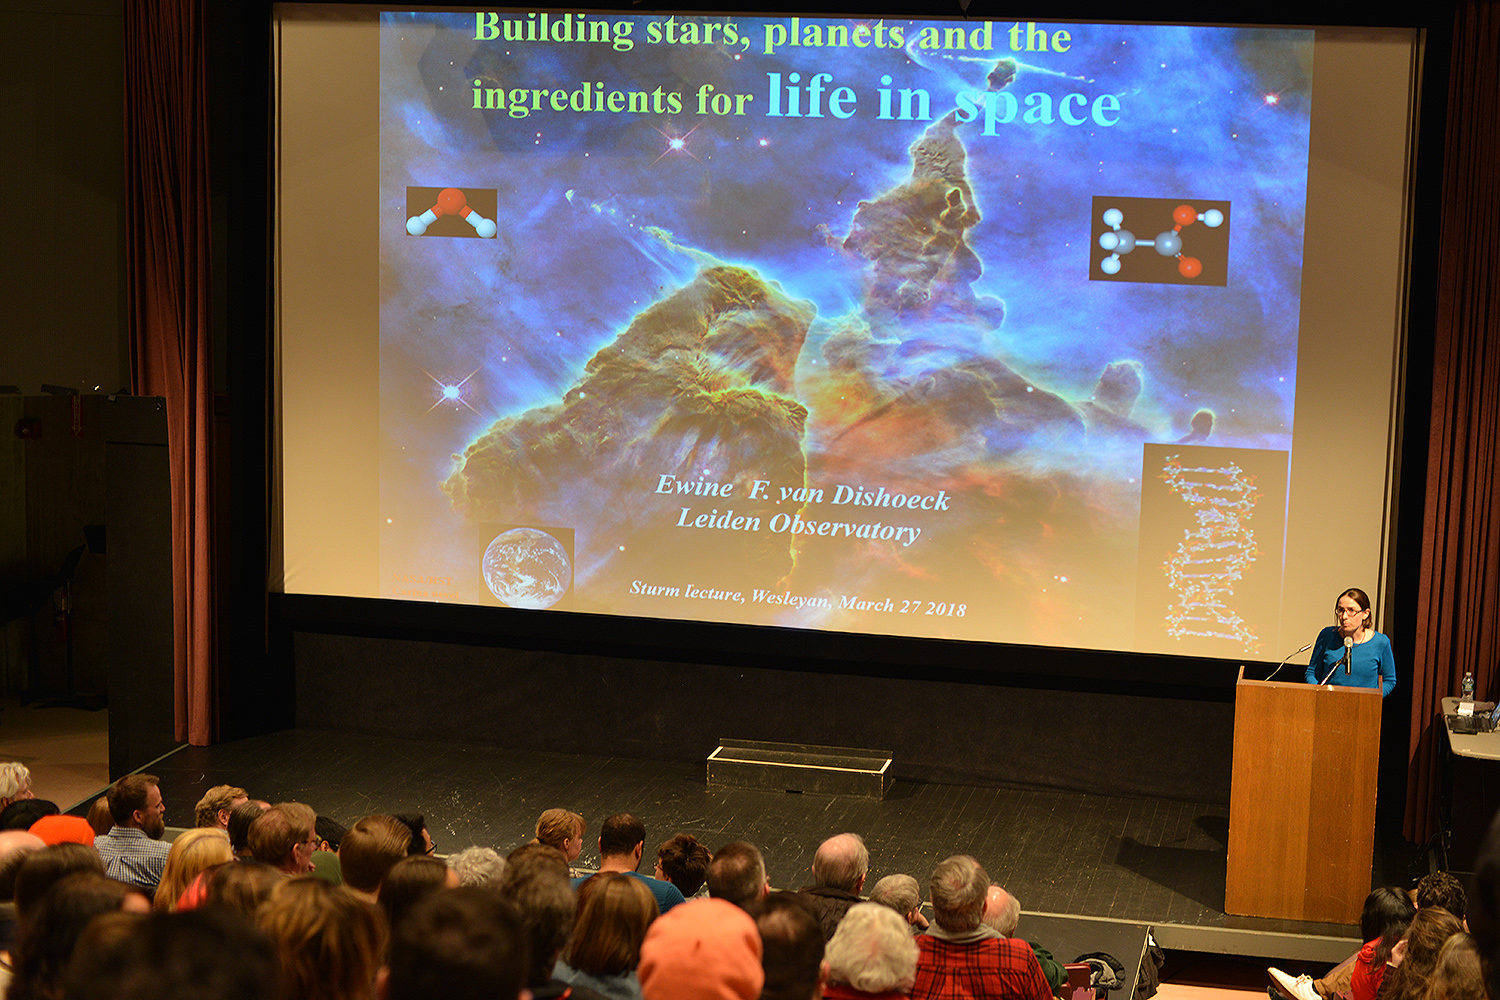 On March 27, the campus community gathered to hear the 2018 Sturm Memorial Lecture, titled "Building Stars, Planets and the Ingredients for Life in Space."